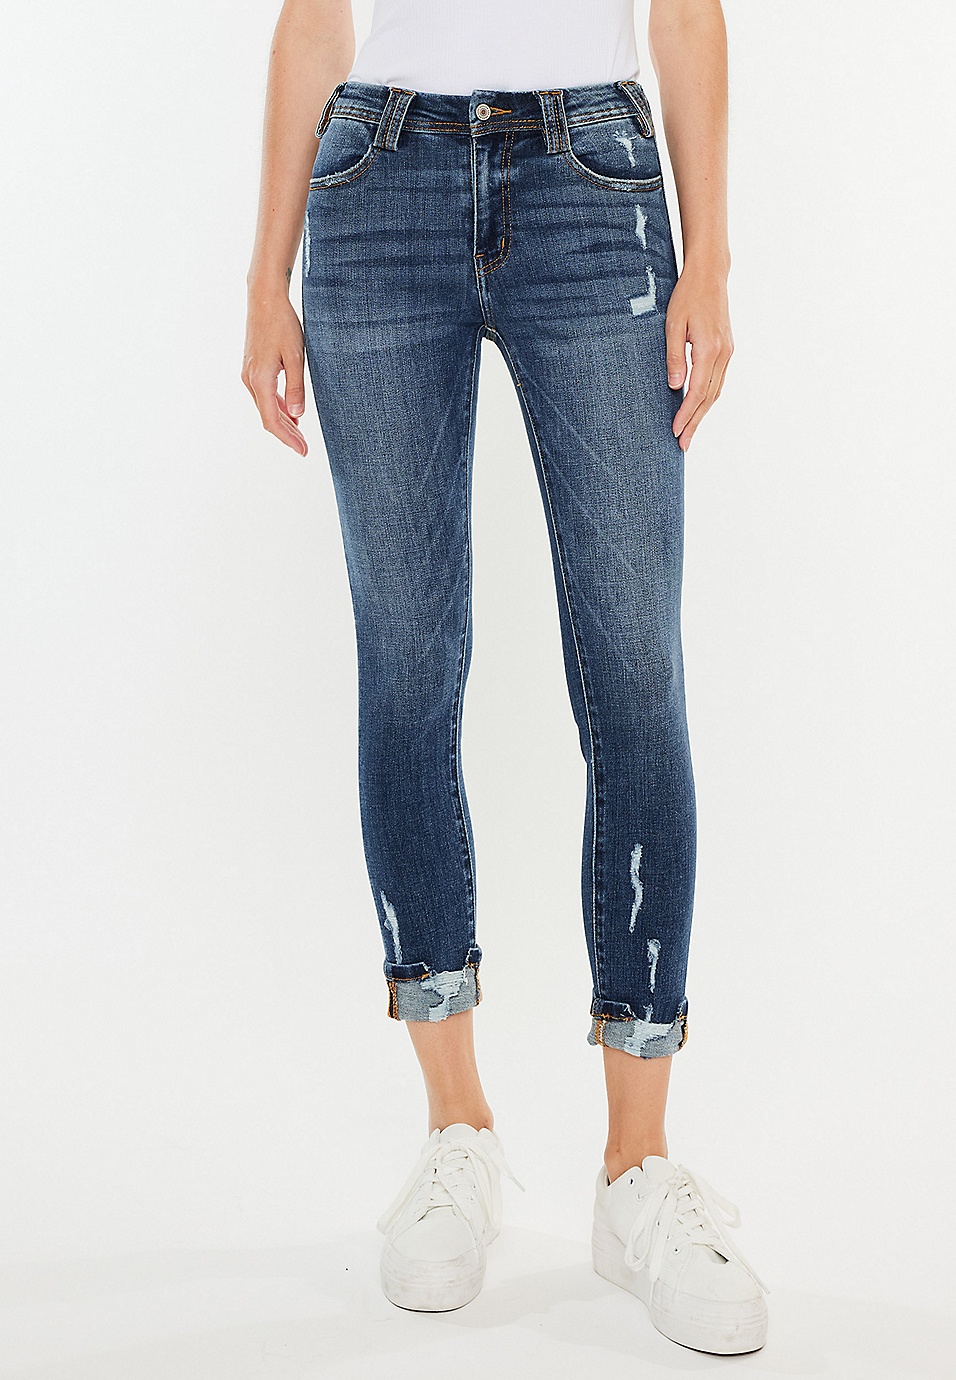 KanCan™ Ripped Mid Rise Cuffed Skinny Ankle Jean